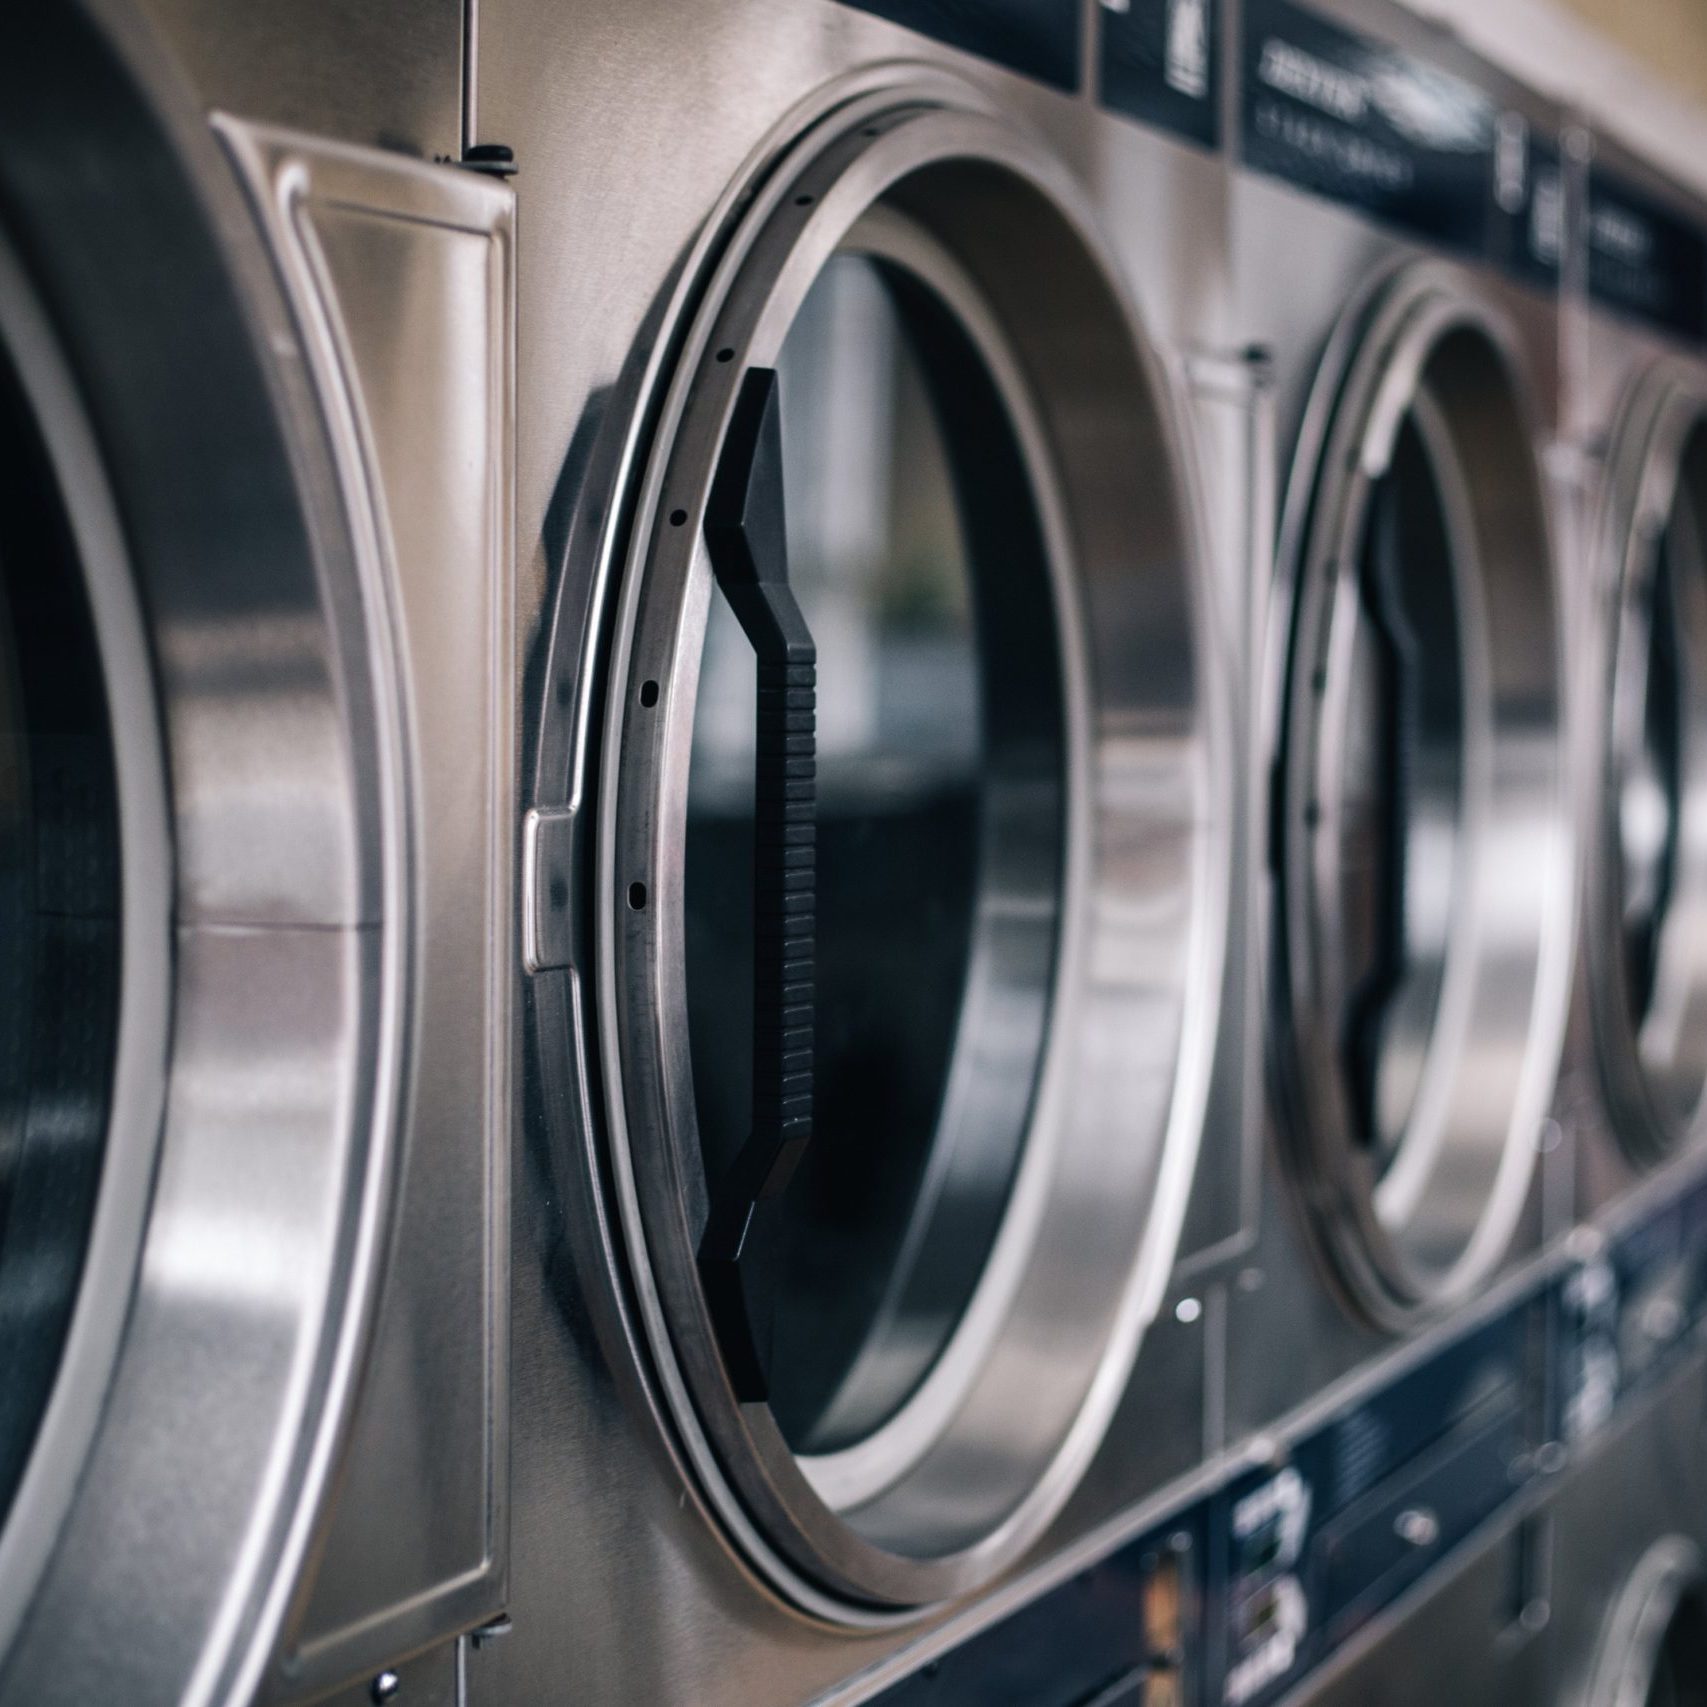 washing-machines-in-a-public-laundromat